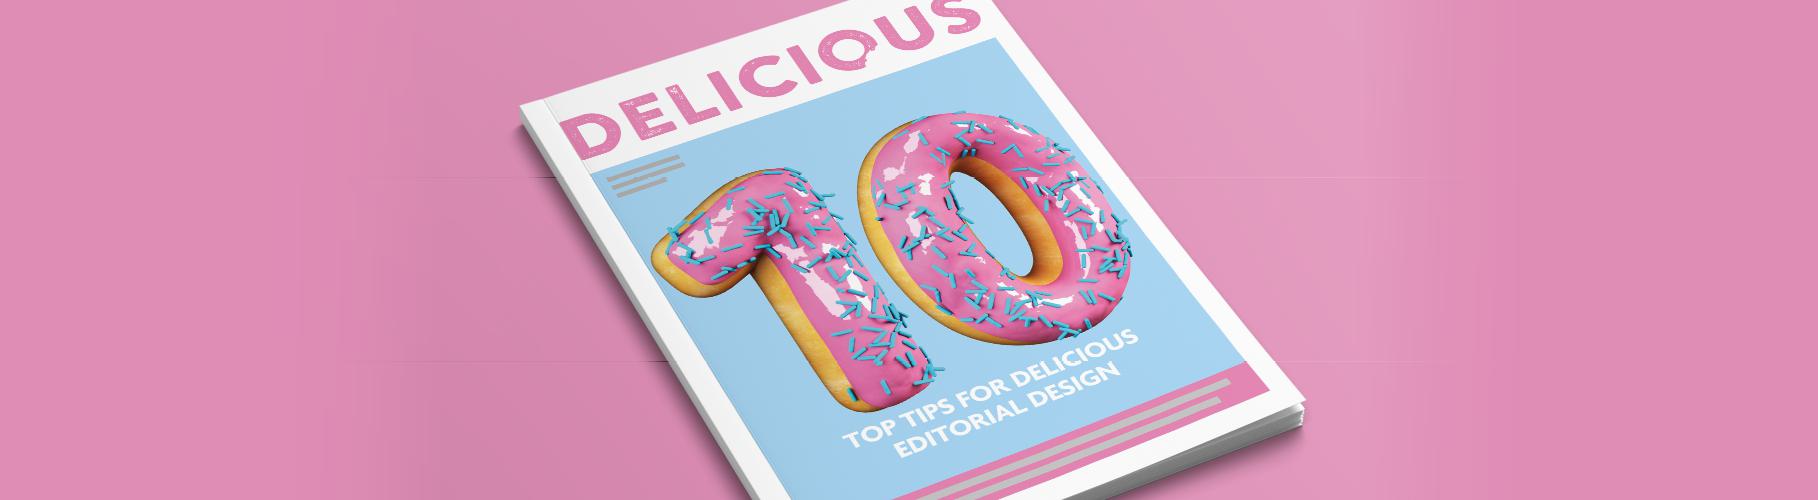 TopIC Banner - Top tips for delicious editorial design